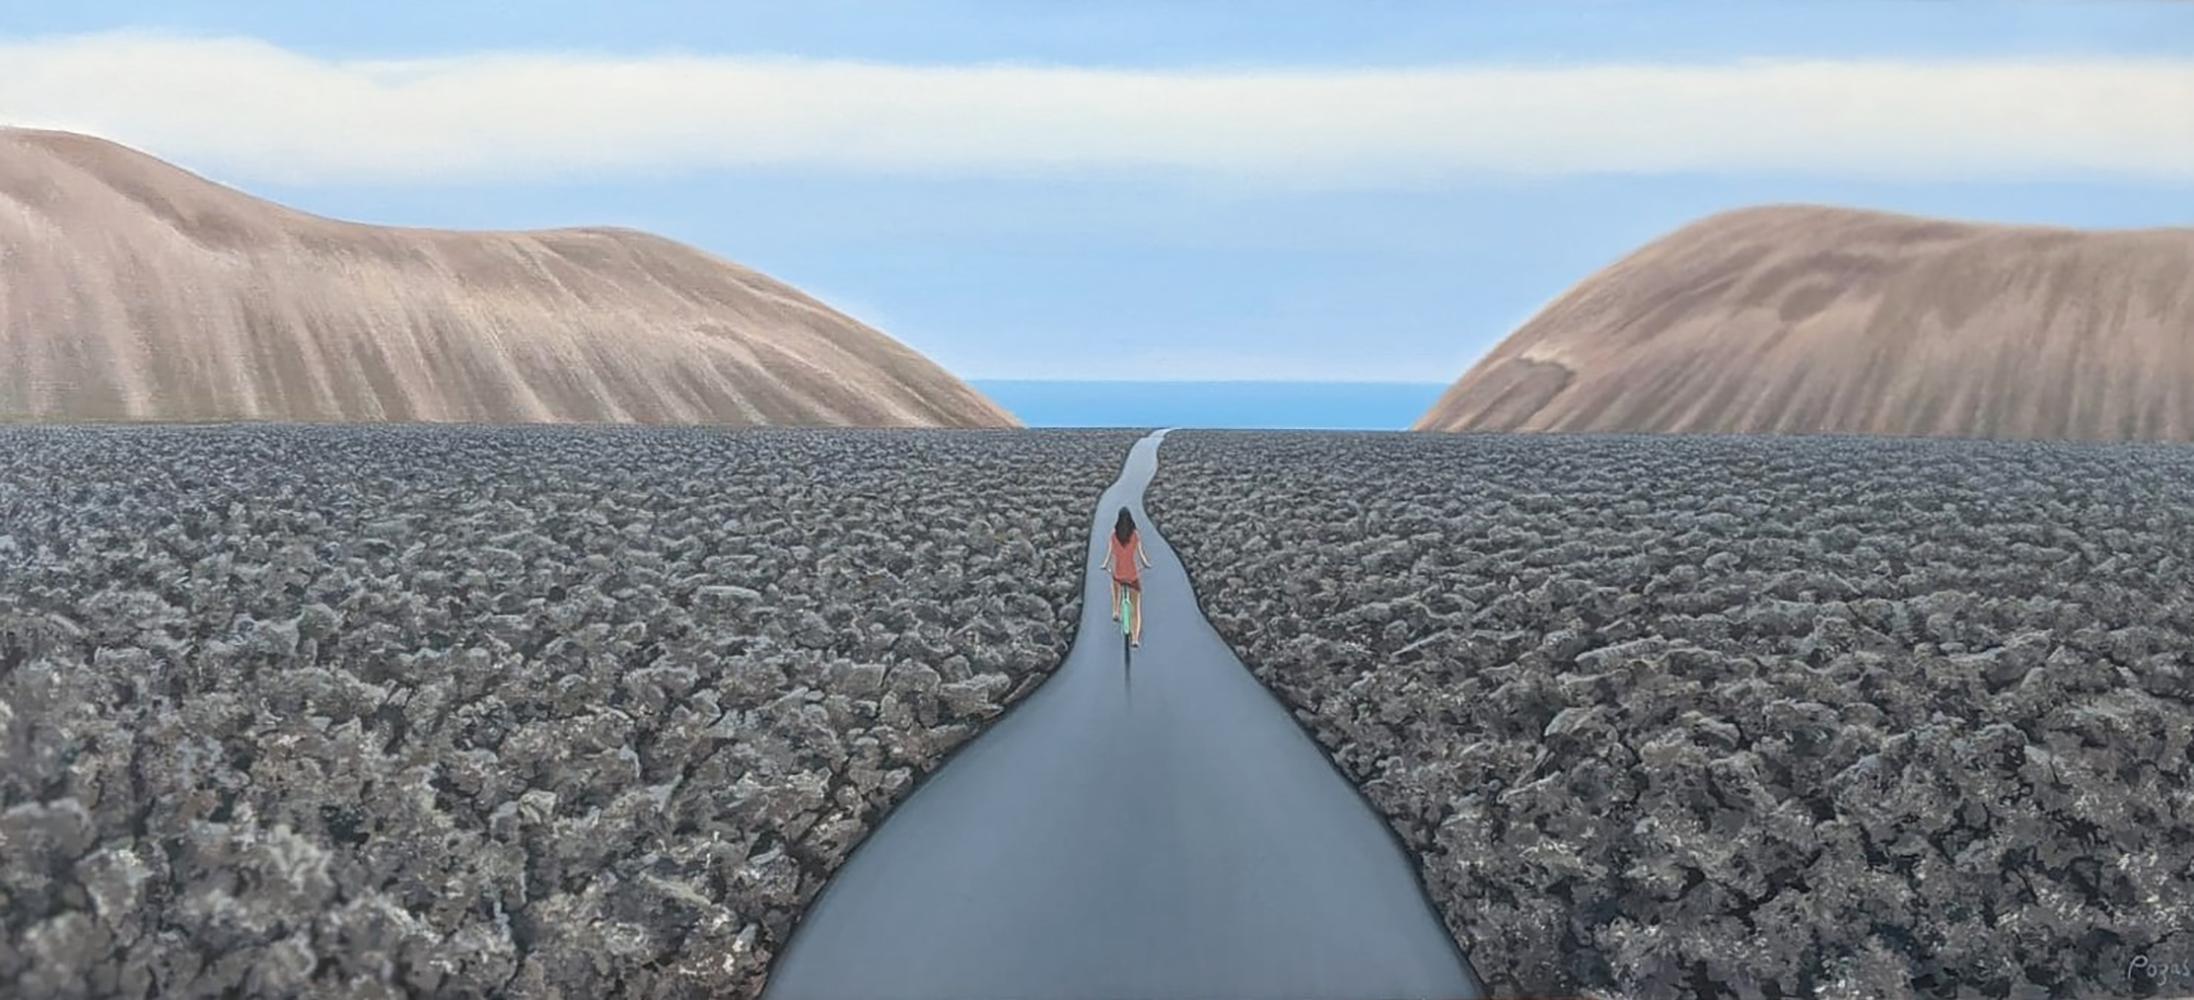 René Monzón Relova “Pozas” Landscape Painting -  The Yearning of Jose - Surreal Landscape with Woman Riding a Bicycle